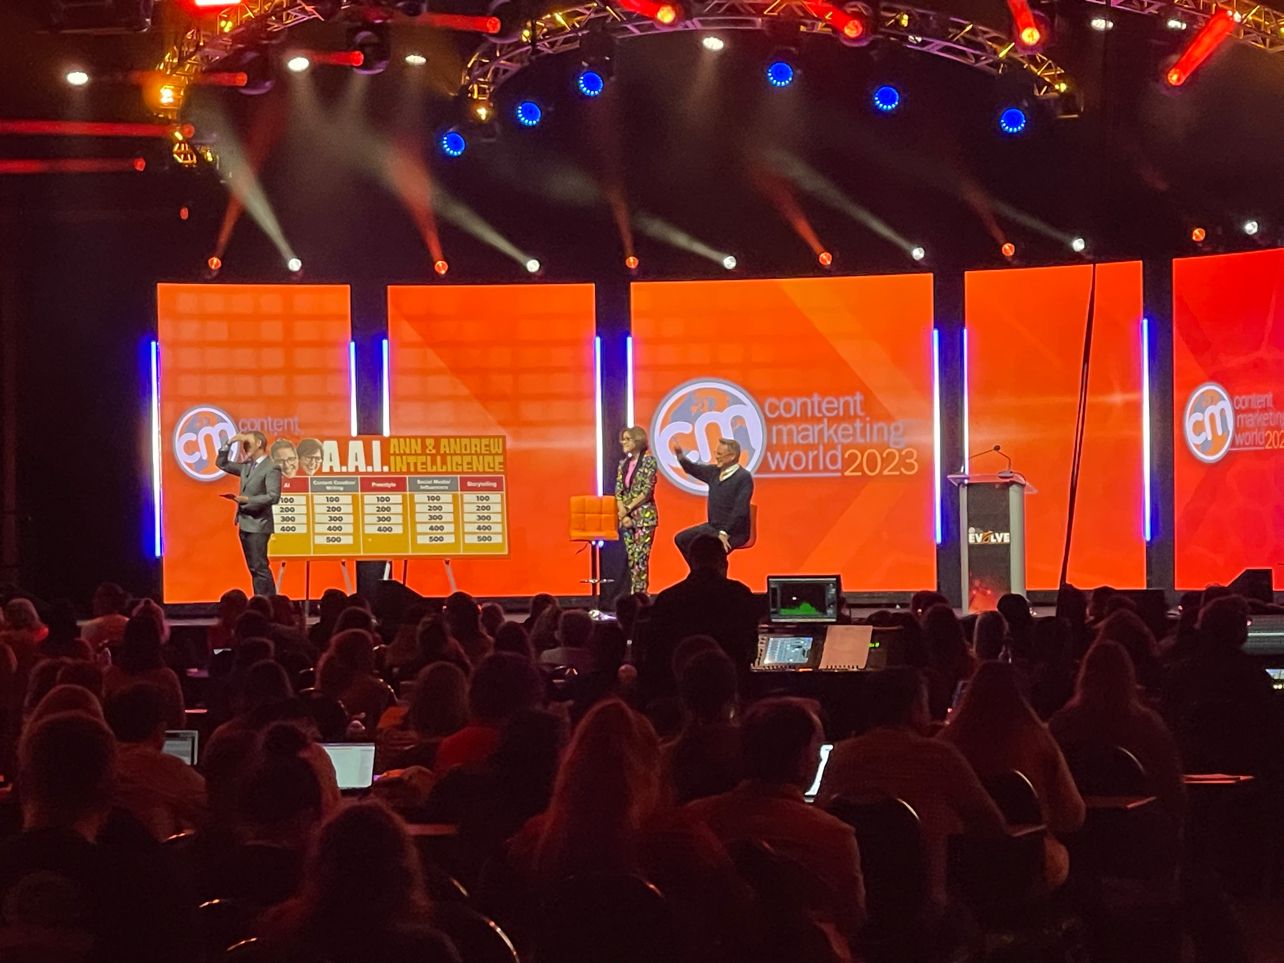 CMWorld 2023: Insights on AI, Content Marketing, and More